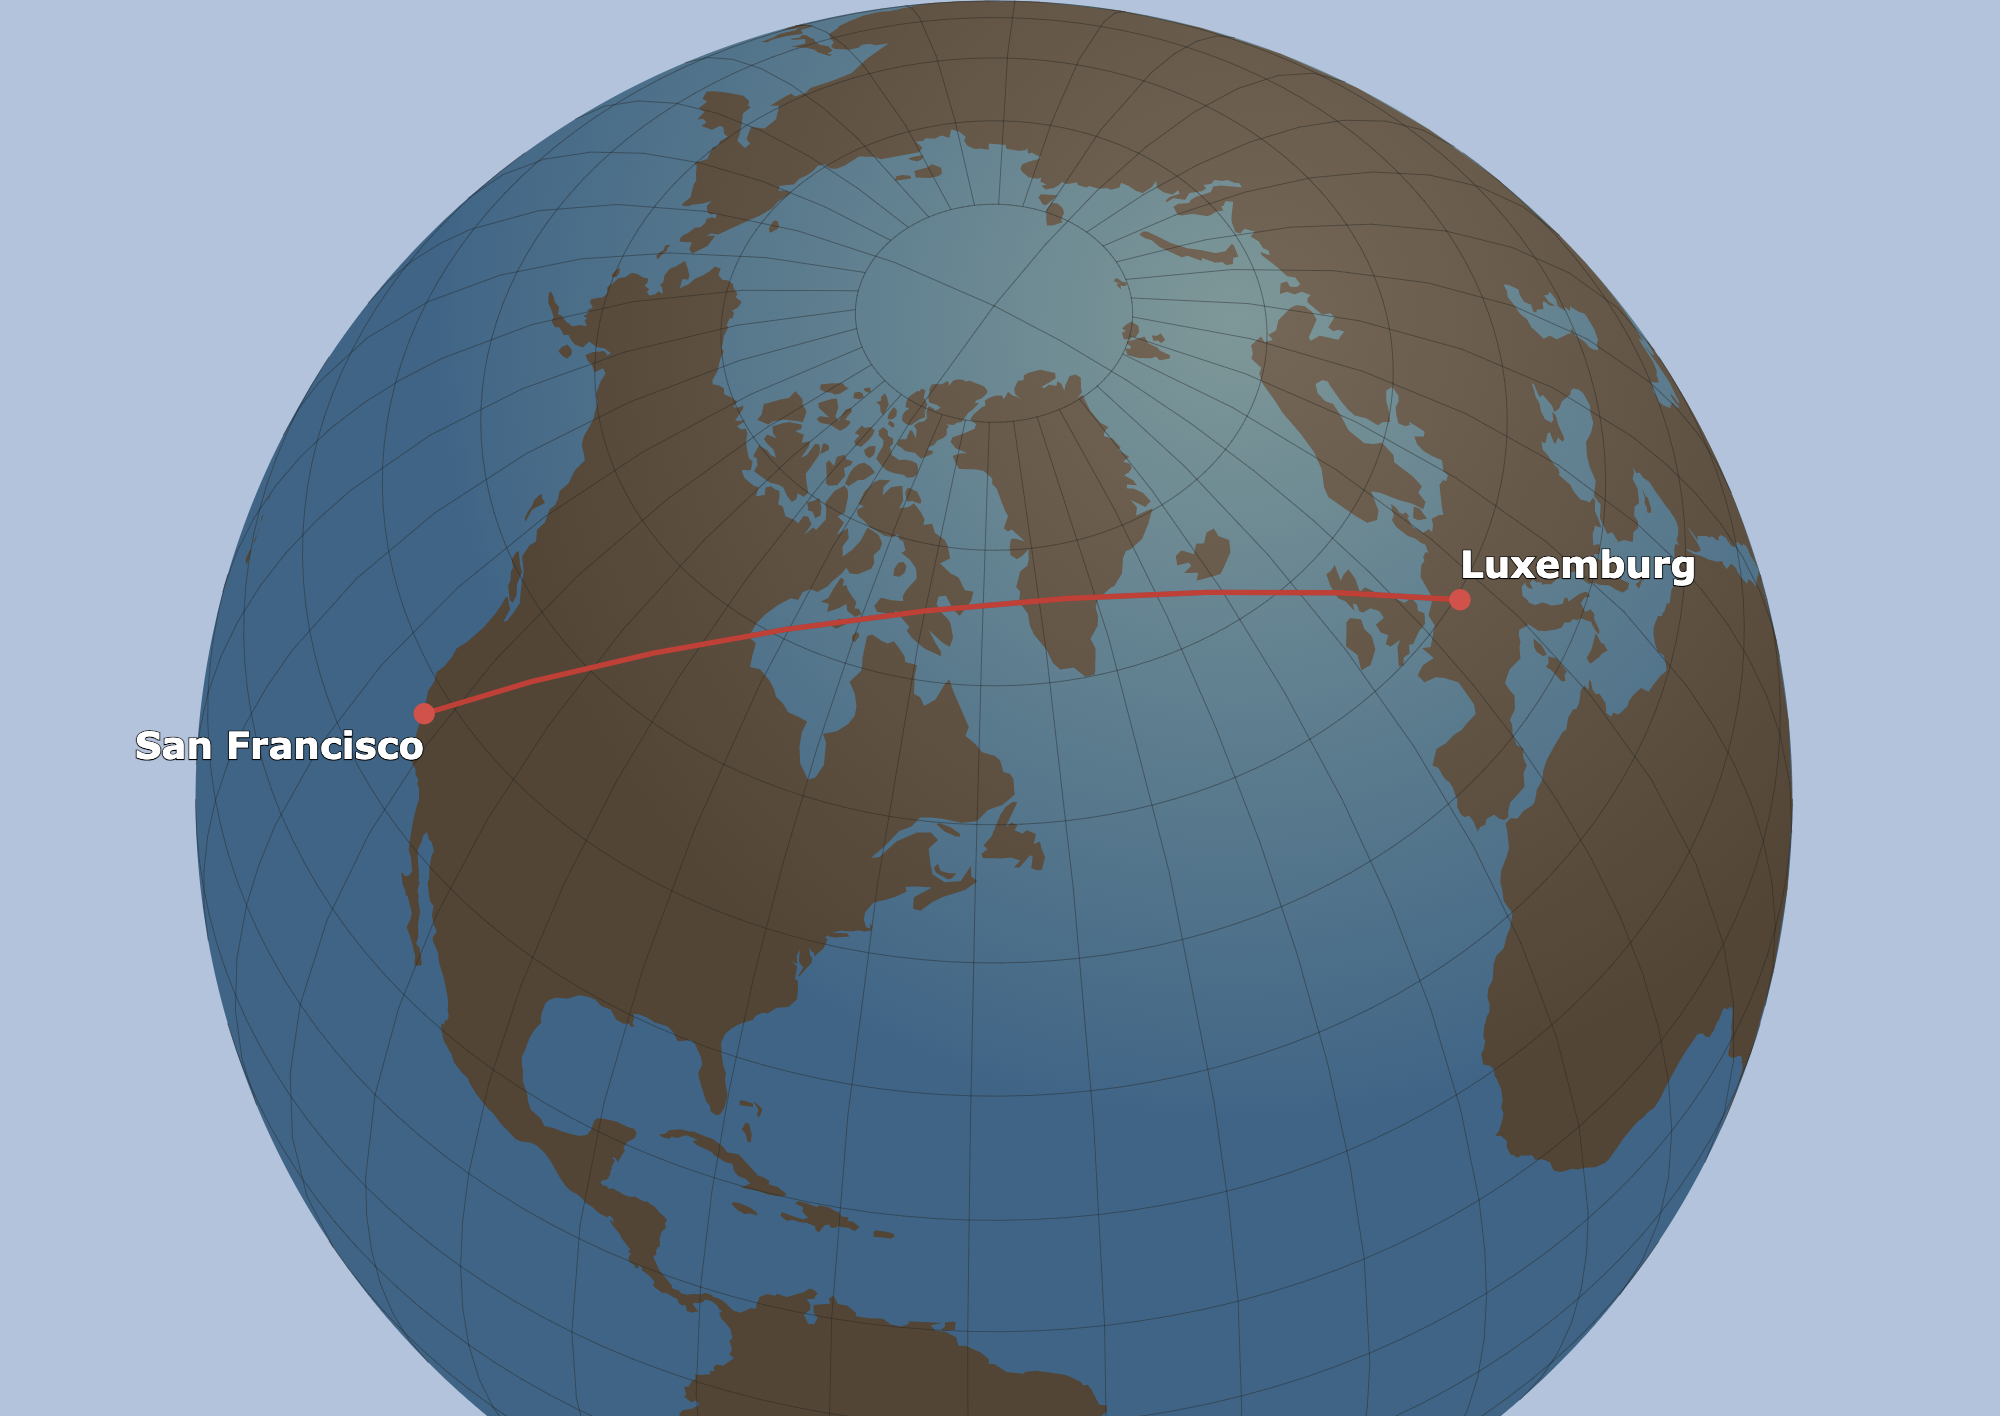 A globe showing the a line between San Francisco and Luxemburg